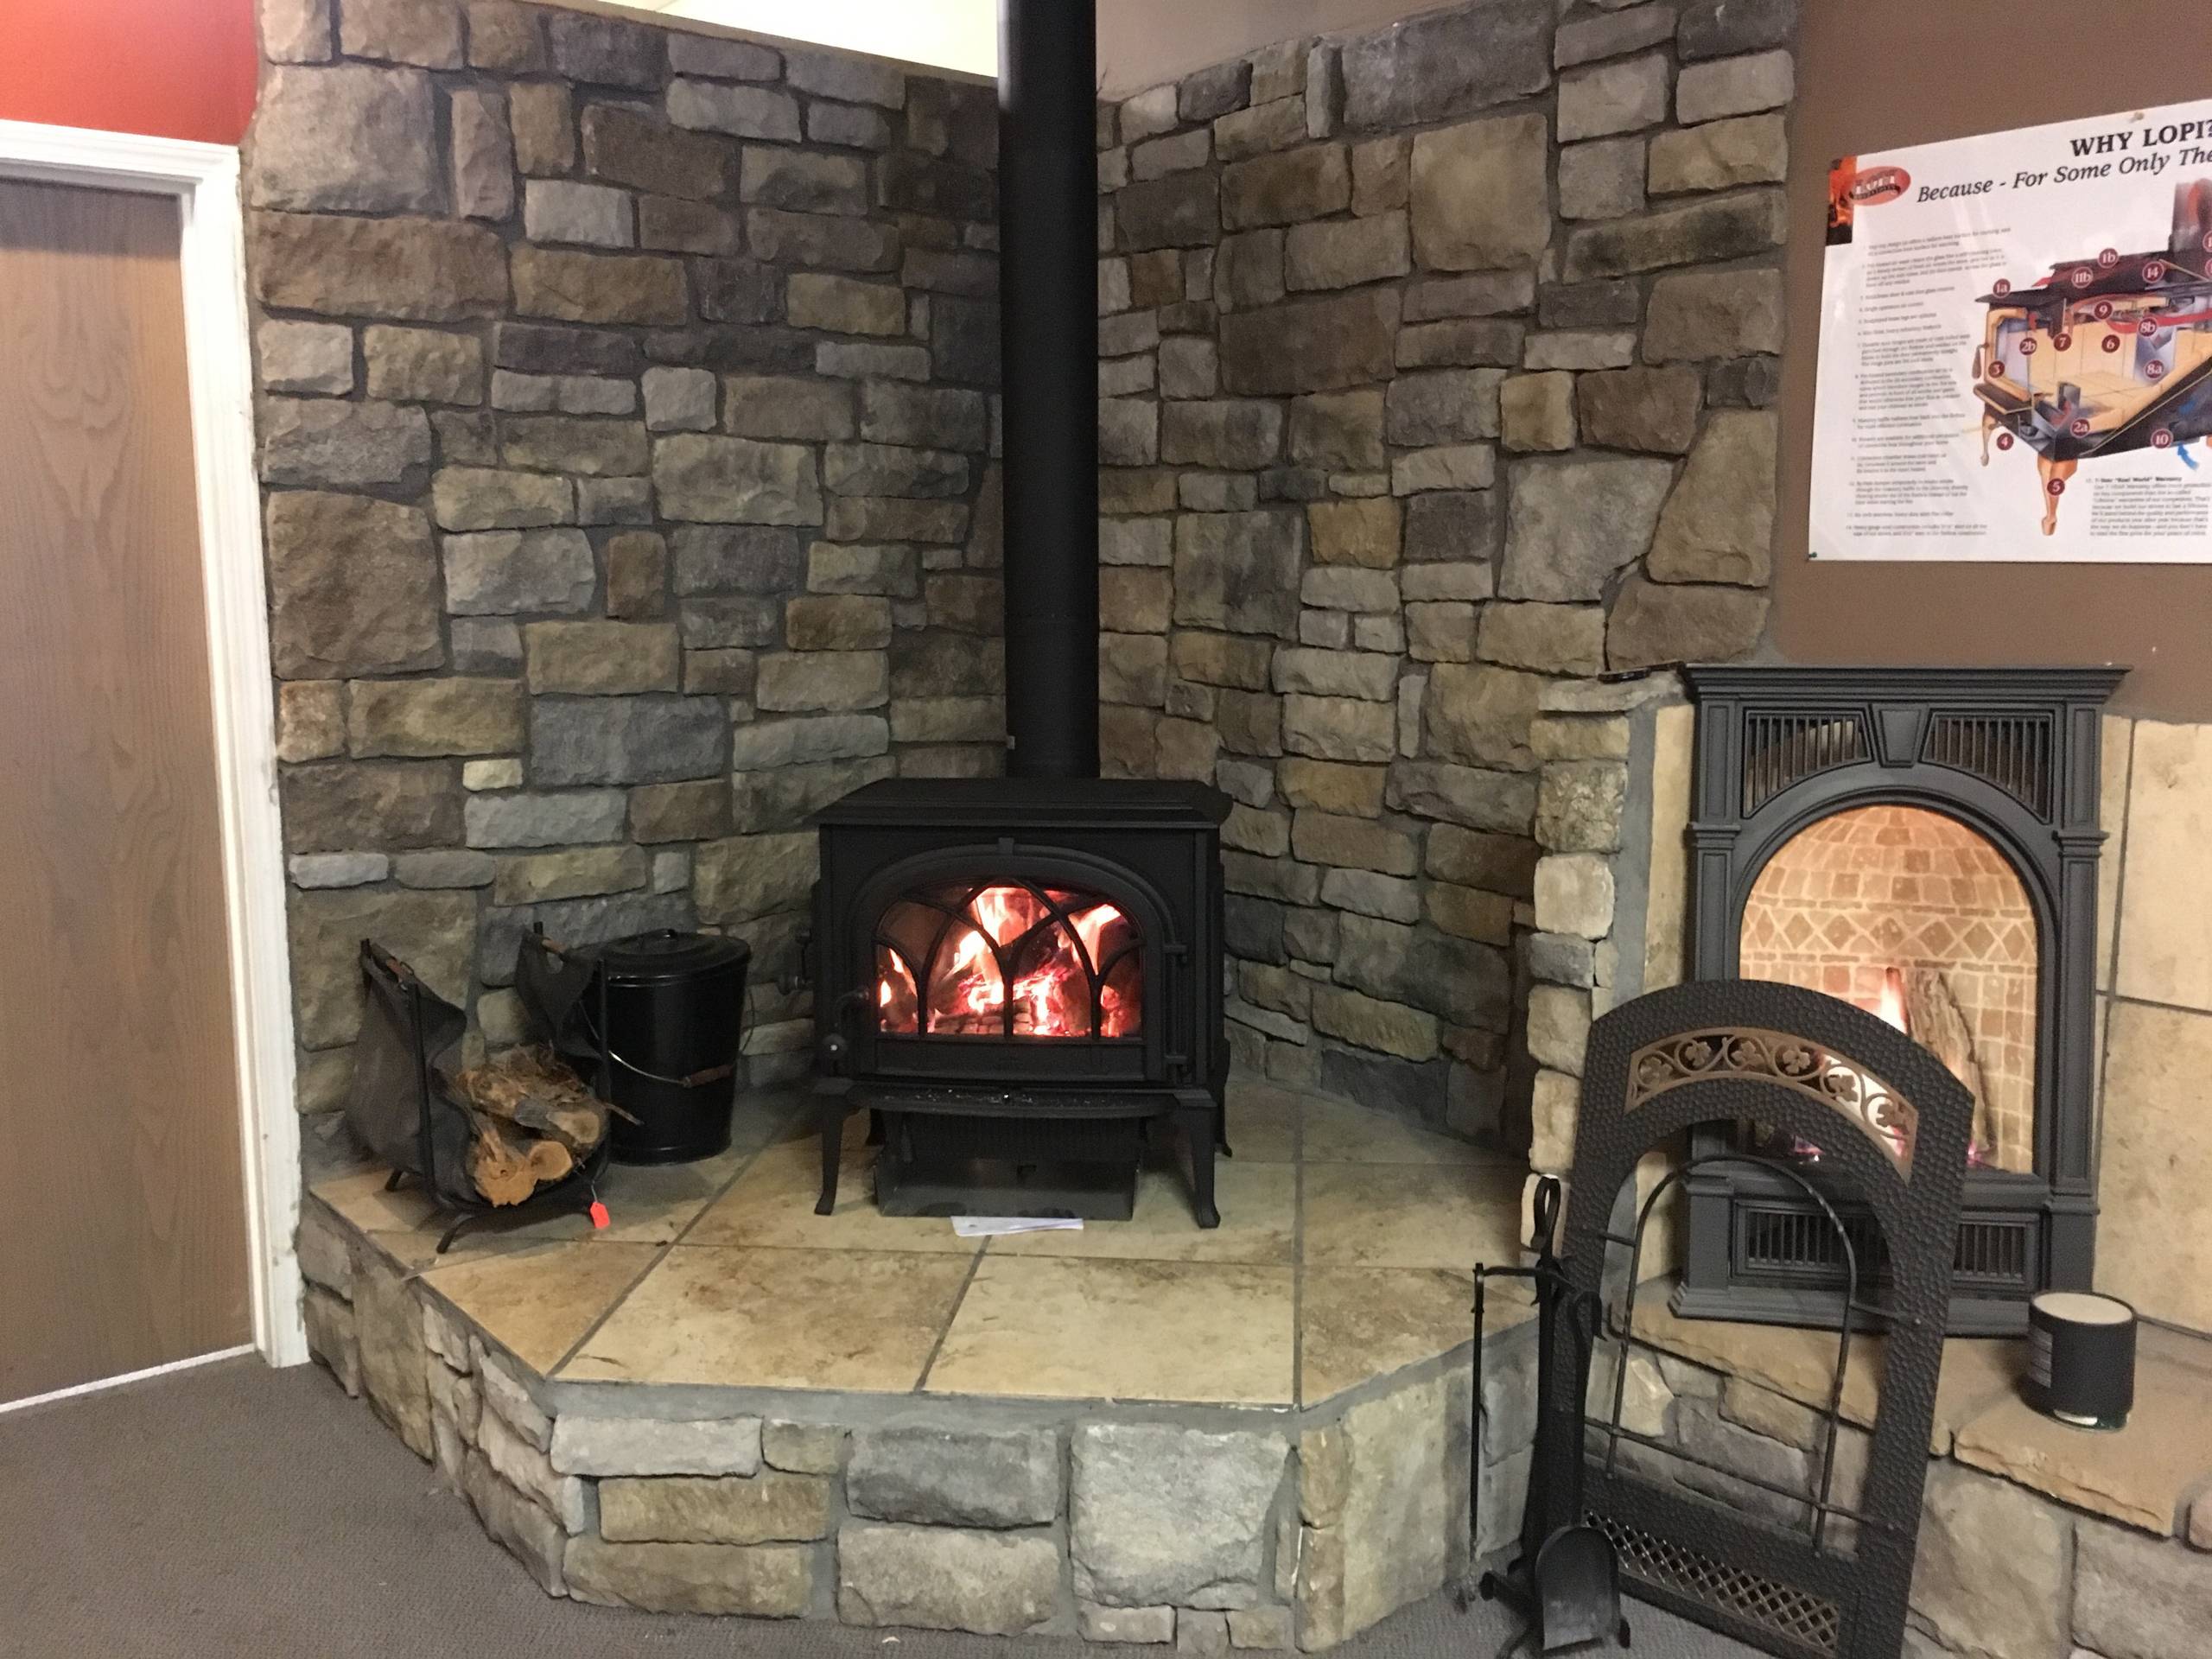 https://st.hzcdn.com/simgs/pictures/family-rooms/wood-stoves-flagstaff-hearth-and-home-img~0761acb40ab2c50b_14-9854-1-7567fc8.jpg